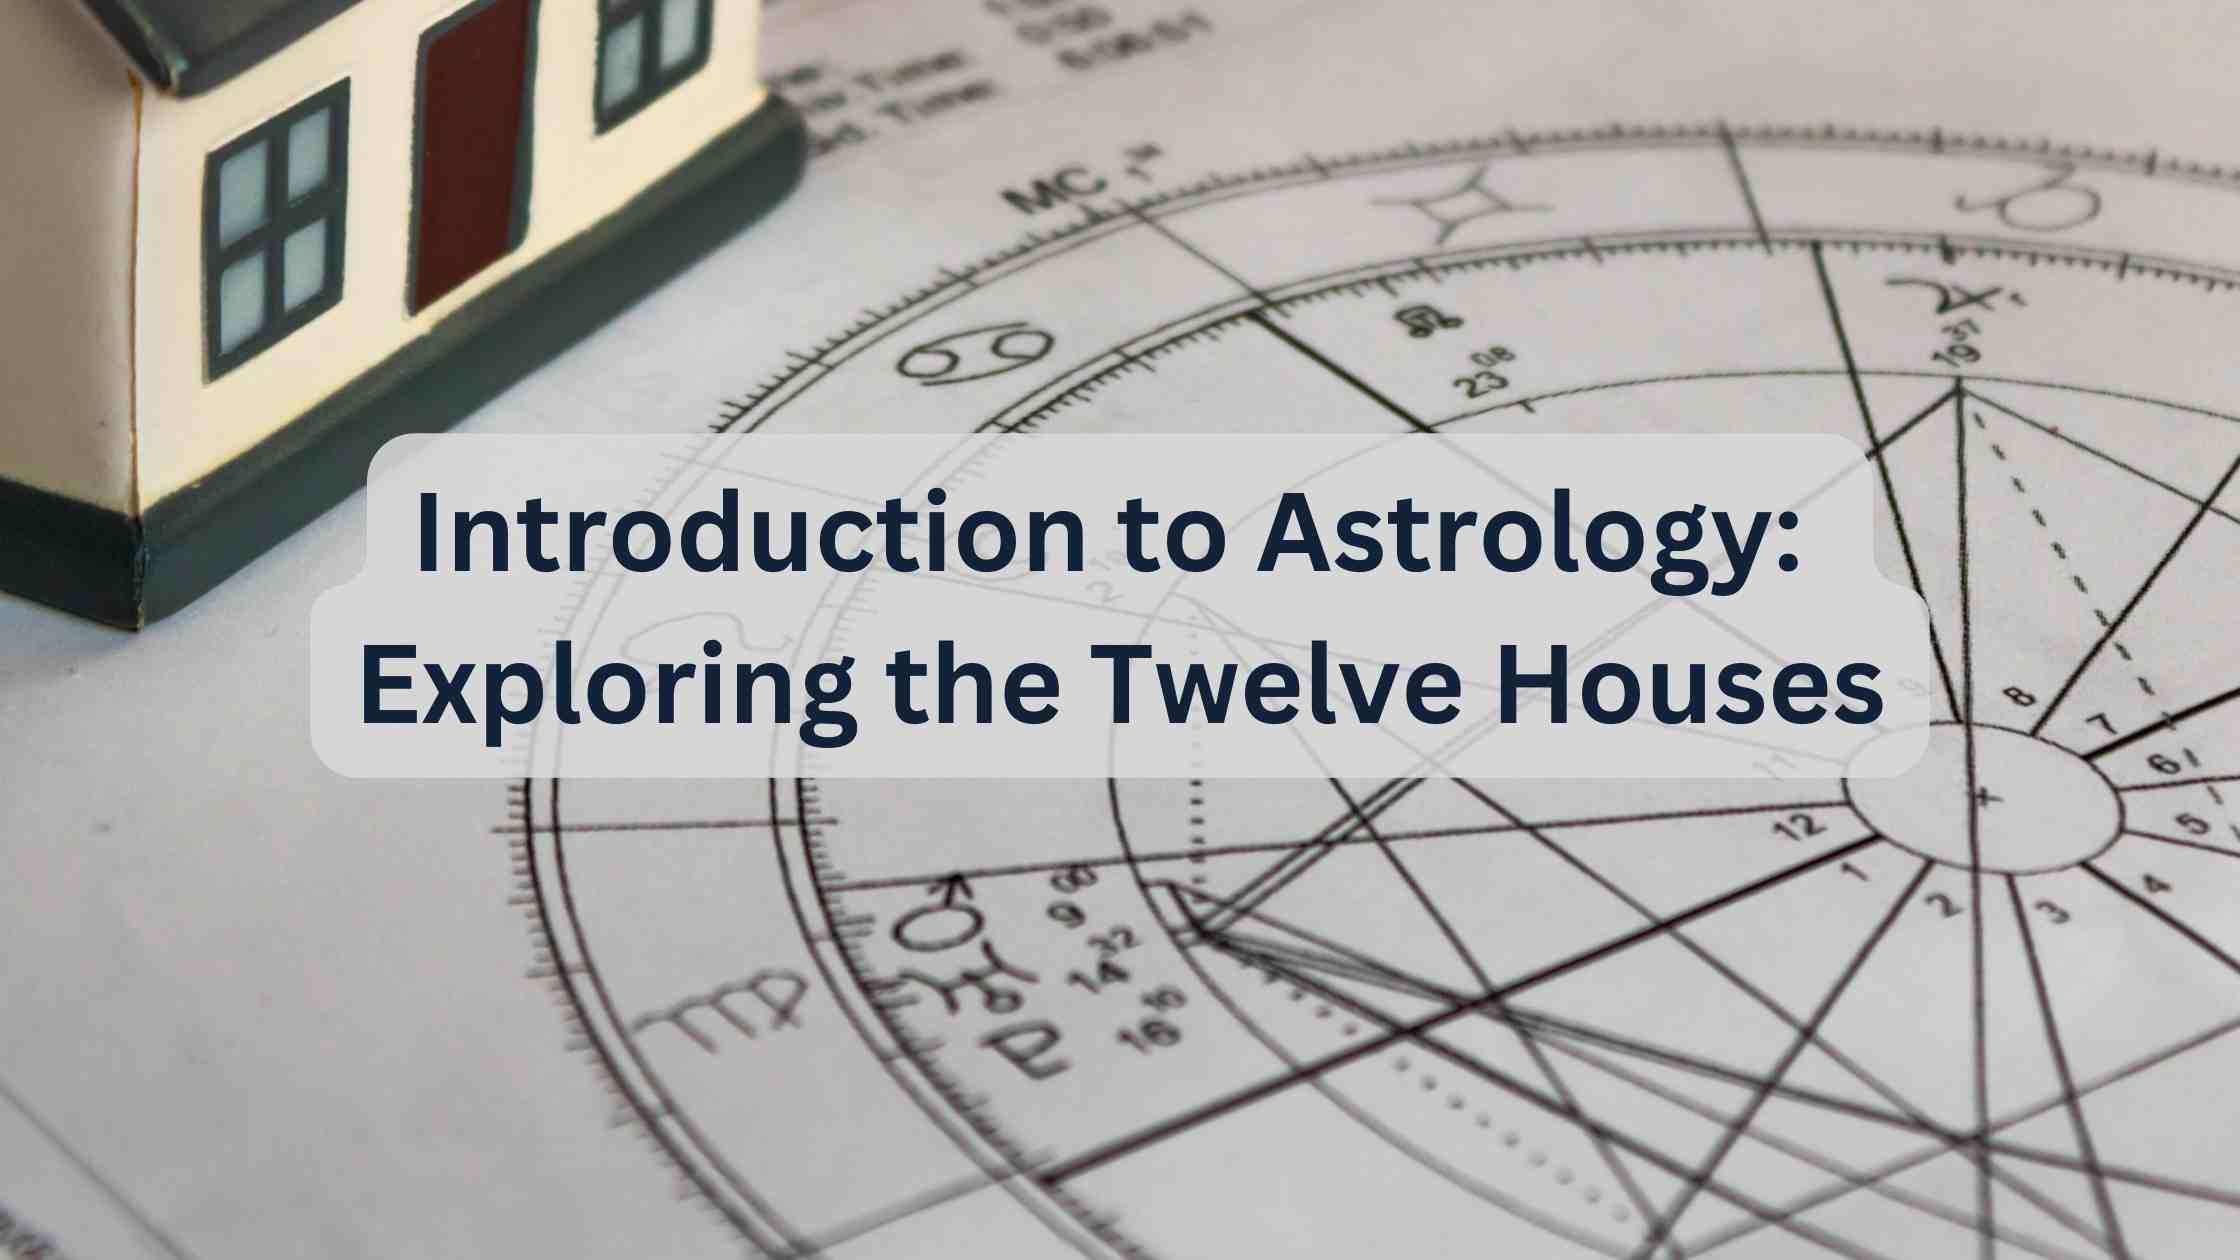 Introduction to Astrology: Exploring the Twelve Houses